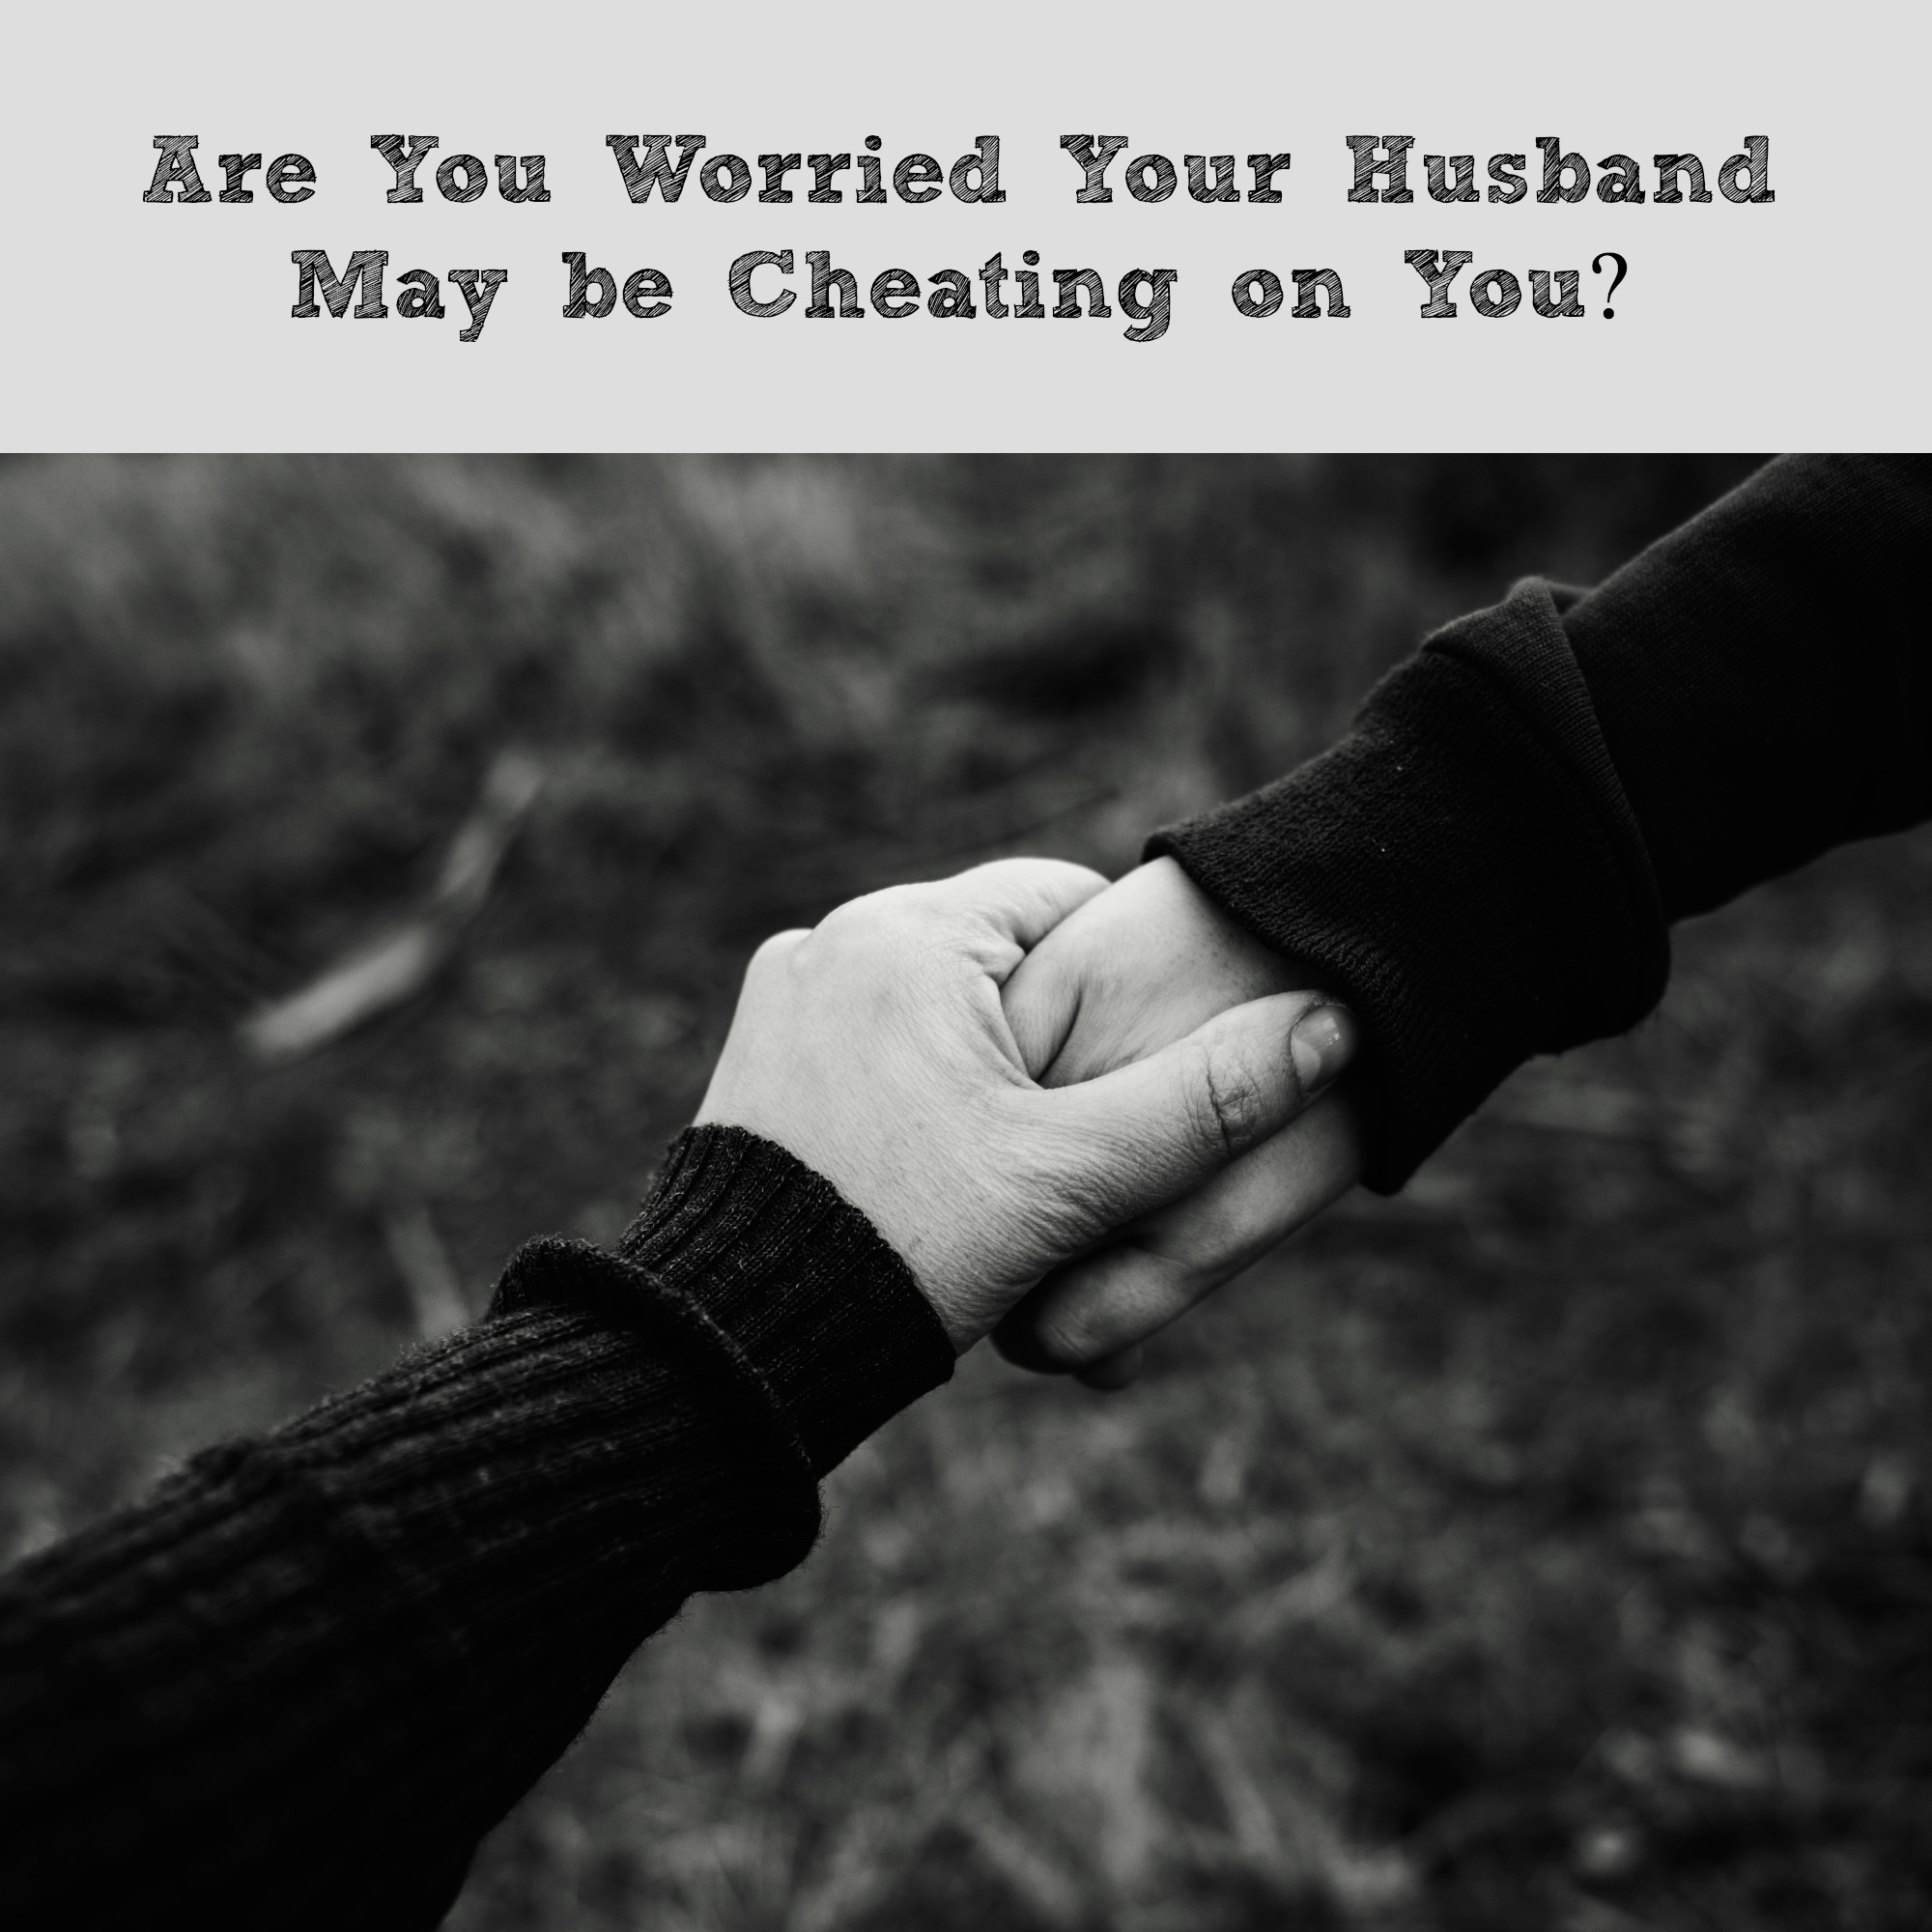 Are You Worried Your Husband May be Cheating on You?